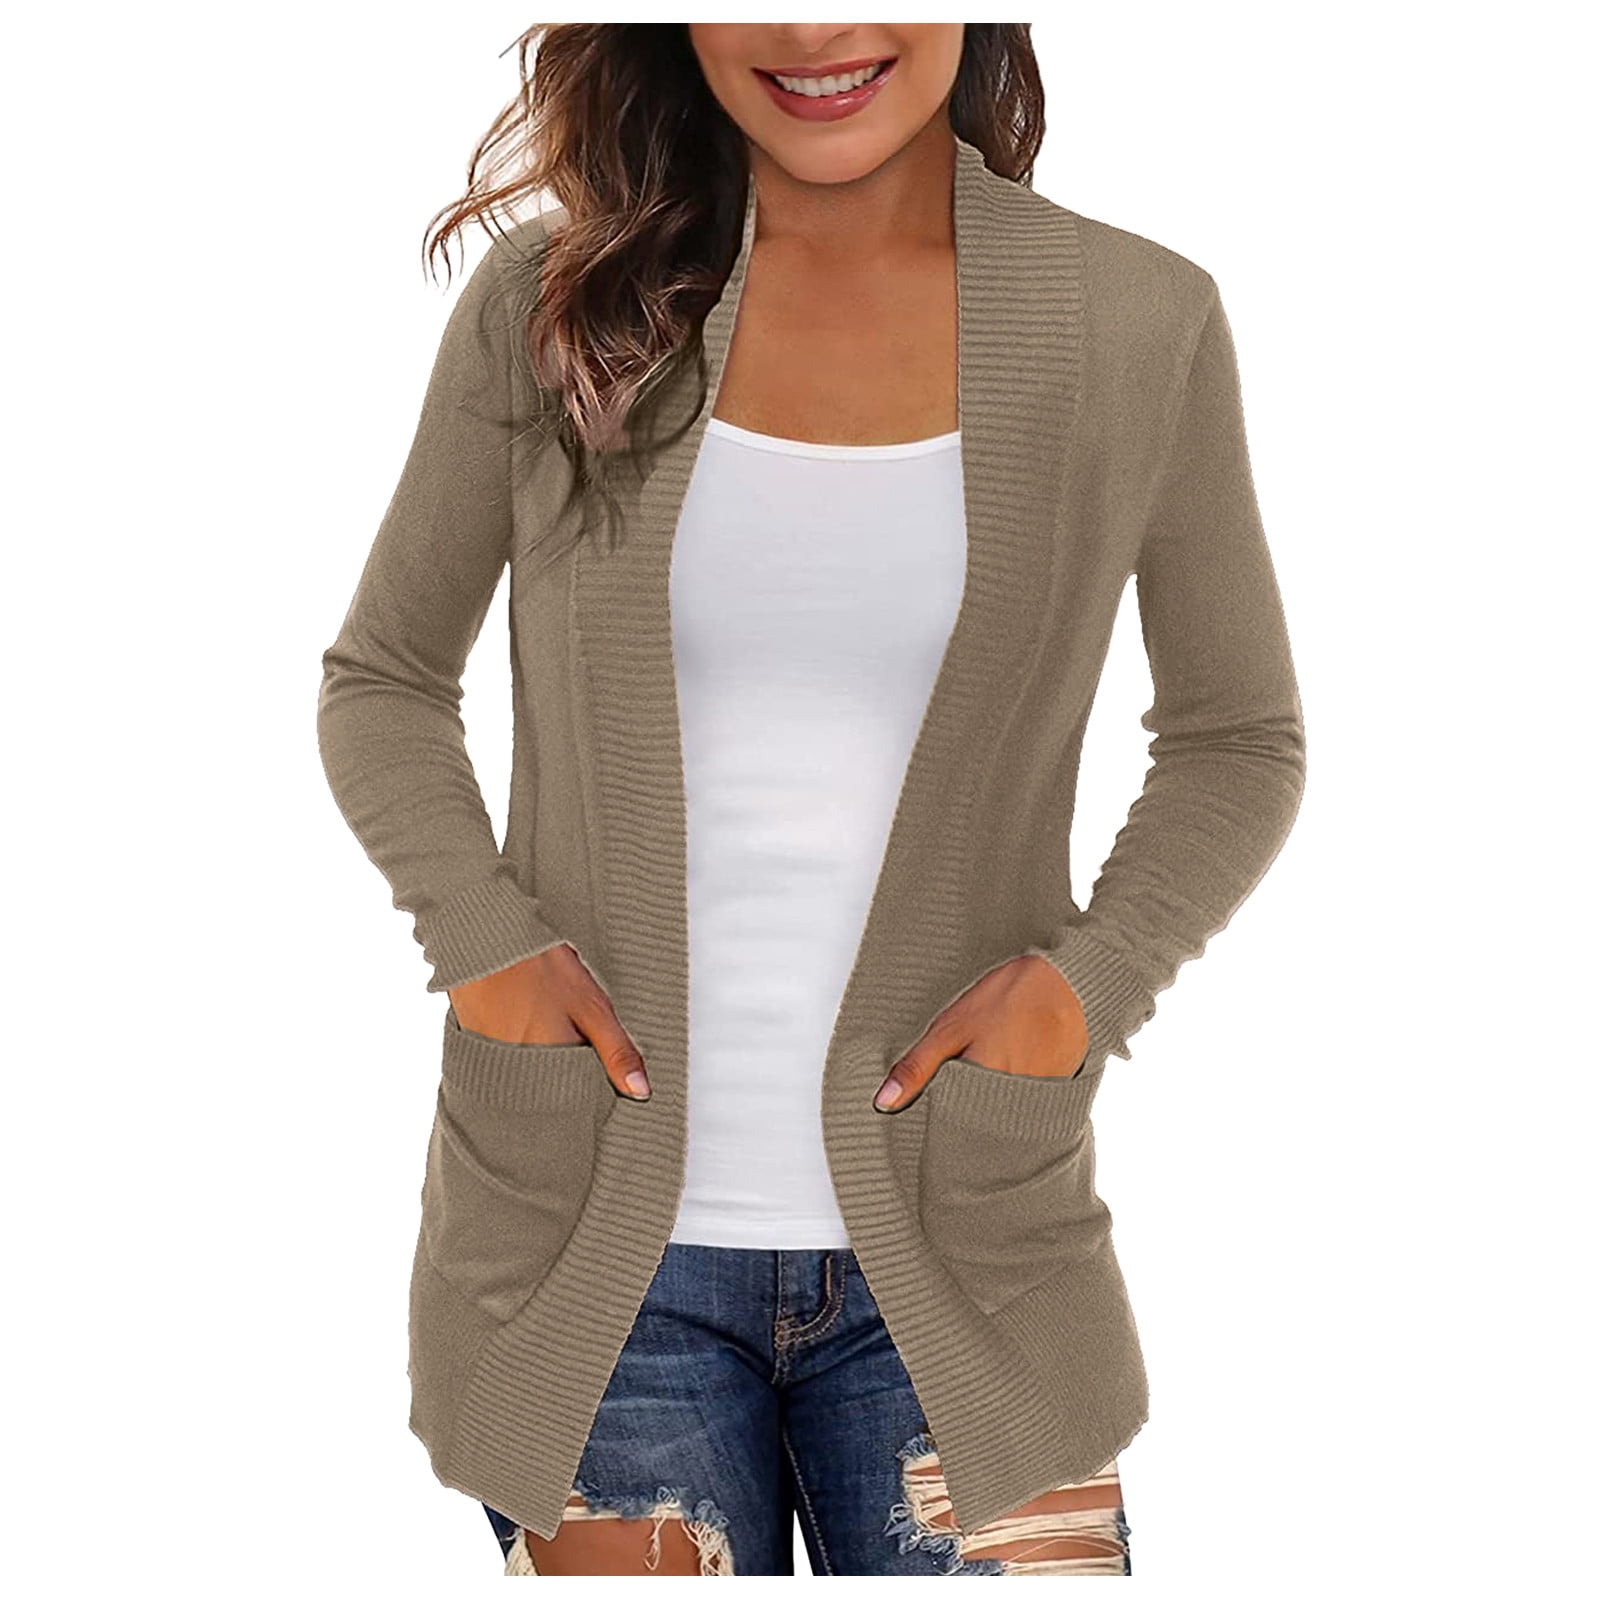 Outfmvch sweaters for women Cardigans With Pockets Casual Lightweight ...